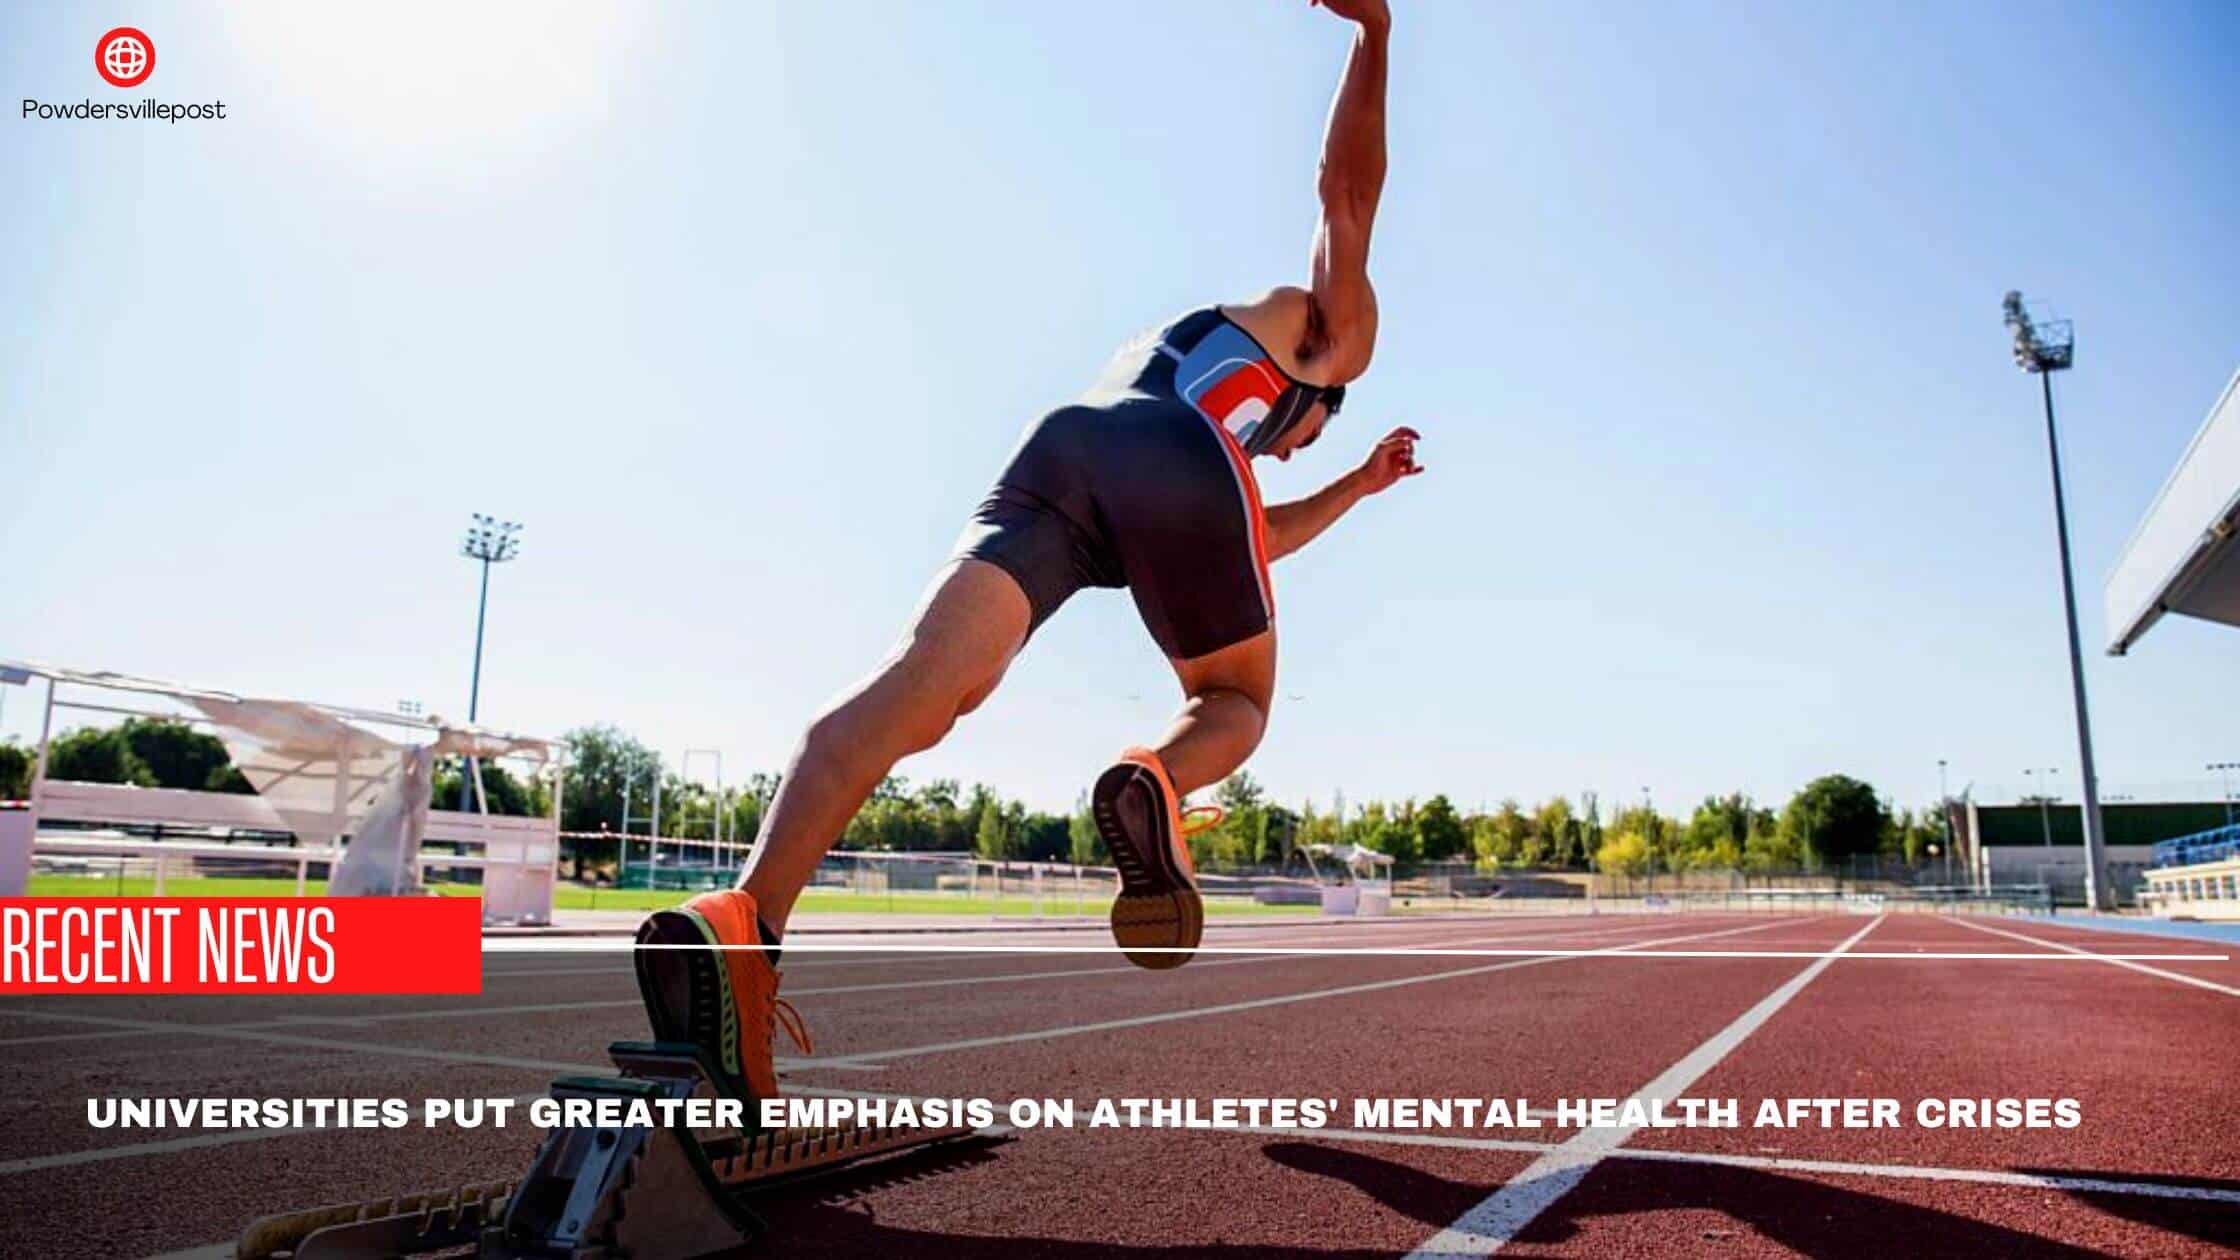 Universities Put Greater Emphasis On Athletes' Mental Health After Crises